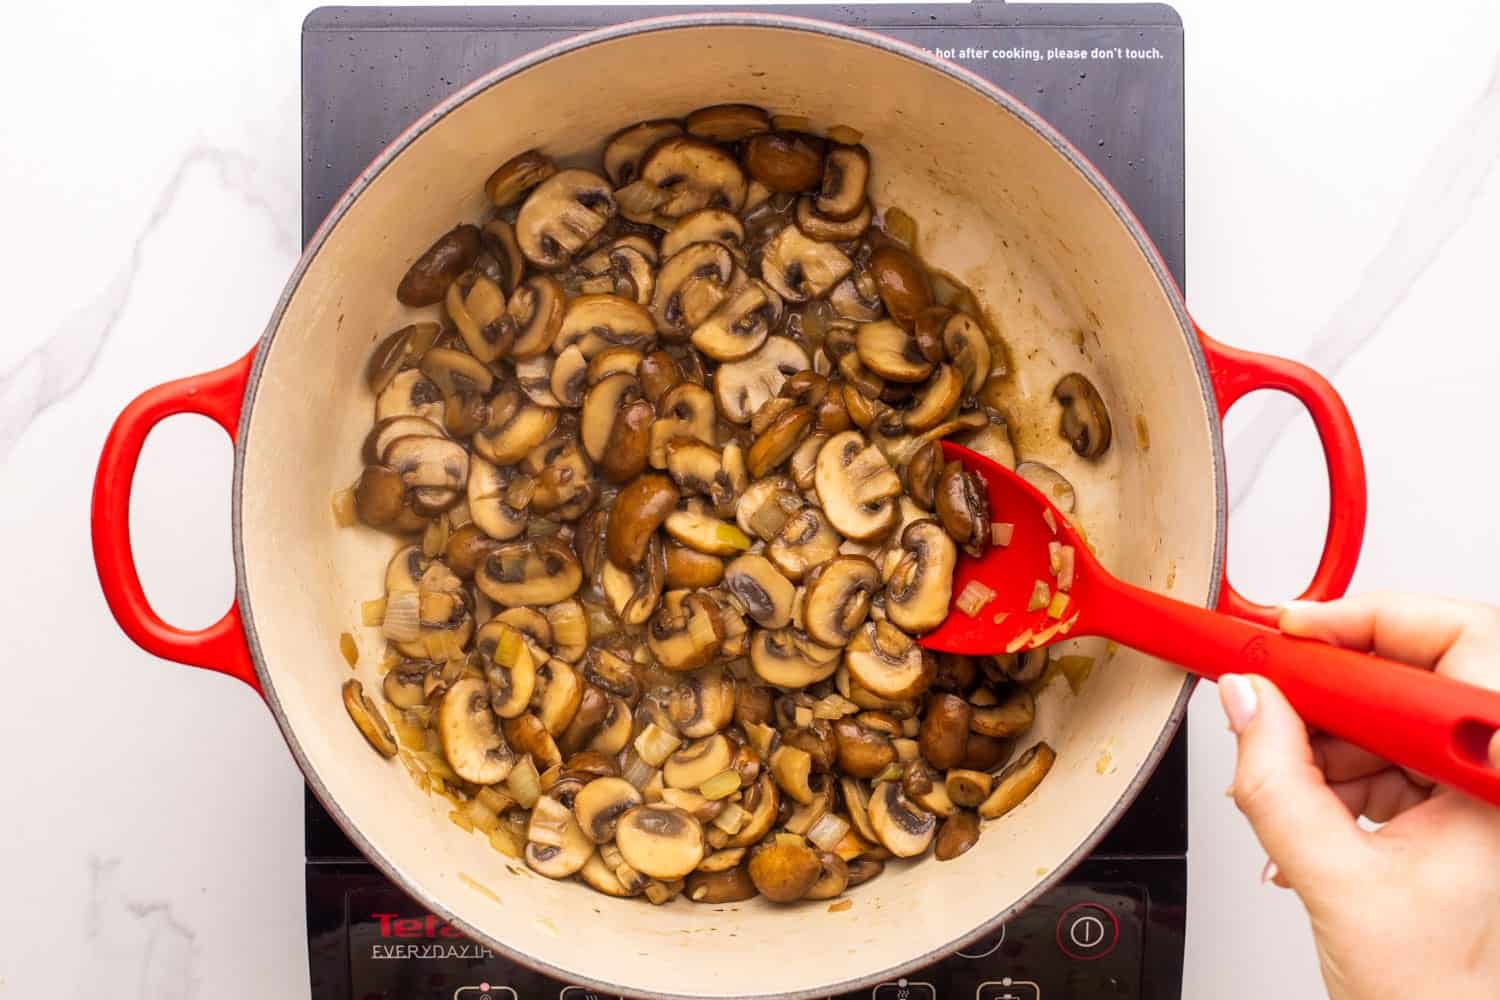 sliced cremini mushrooms cooking in a dutch oven. viewed from above, the mushrooms are browned and stirred by hand with a red spoon.